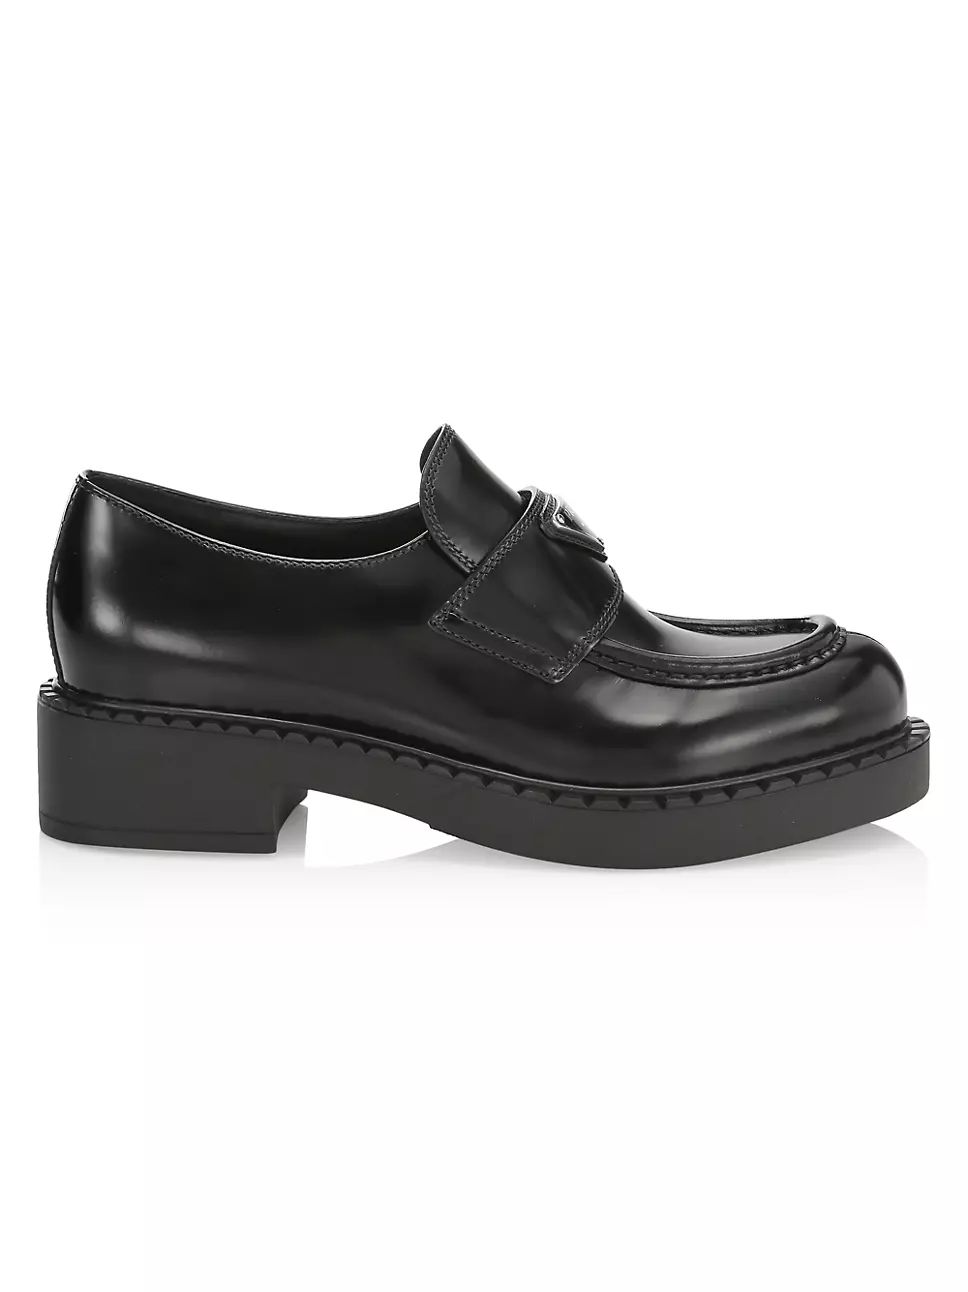 Prada


Spazzolato Logo Platform Leather Loafers



3.2 out of 5 Customer Rating


 

 

 




7 ... | Saks Fifth Avenue